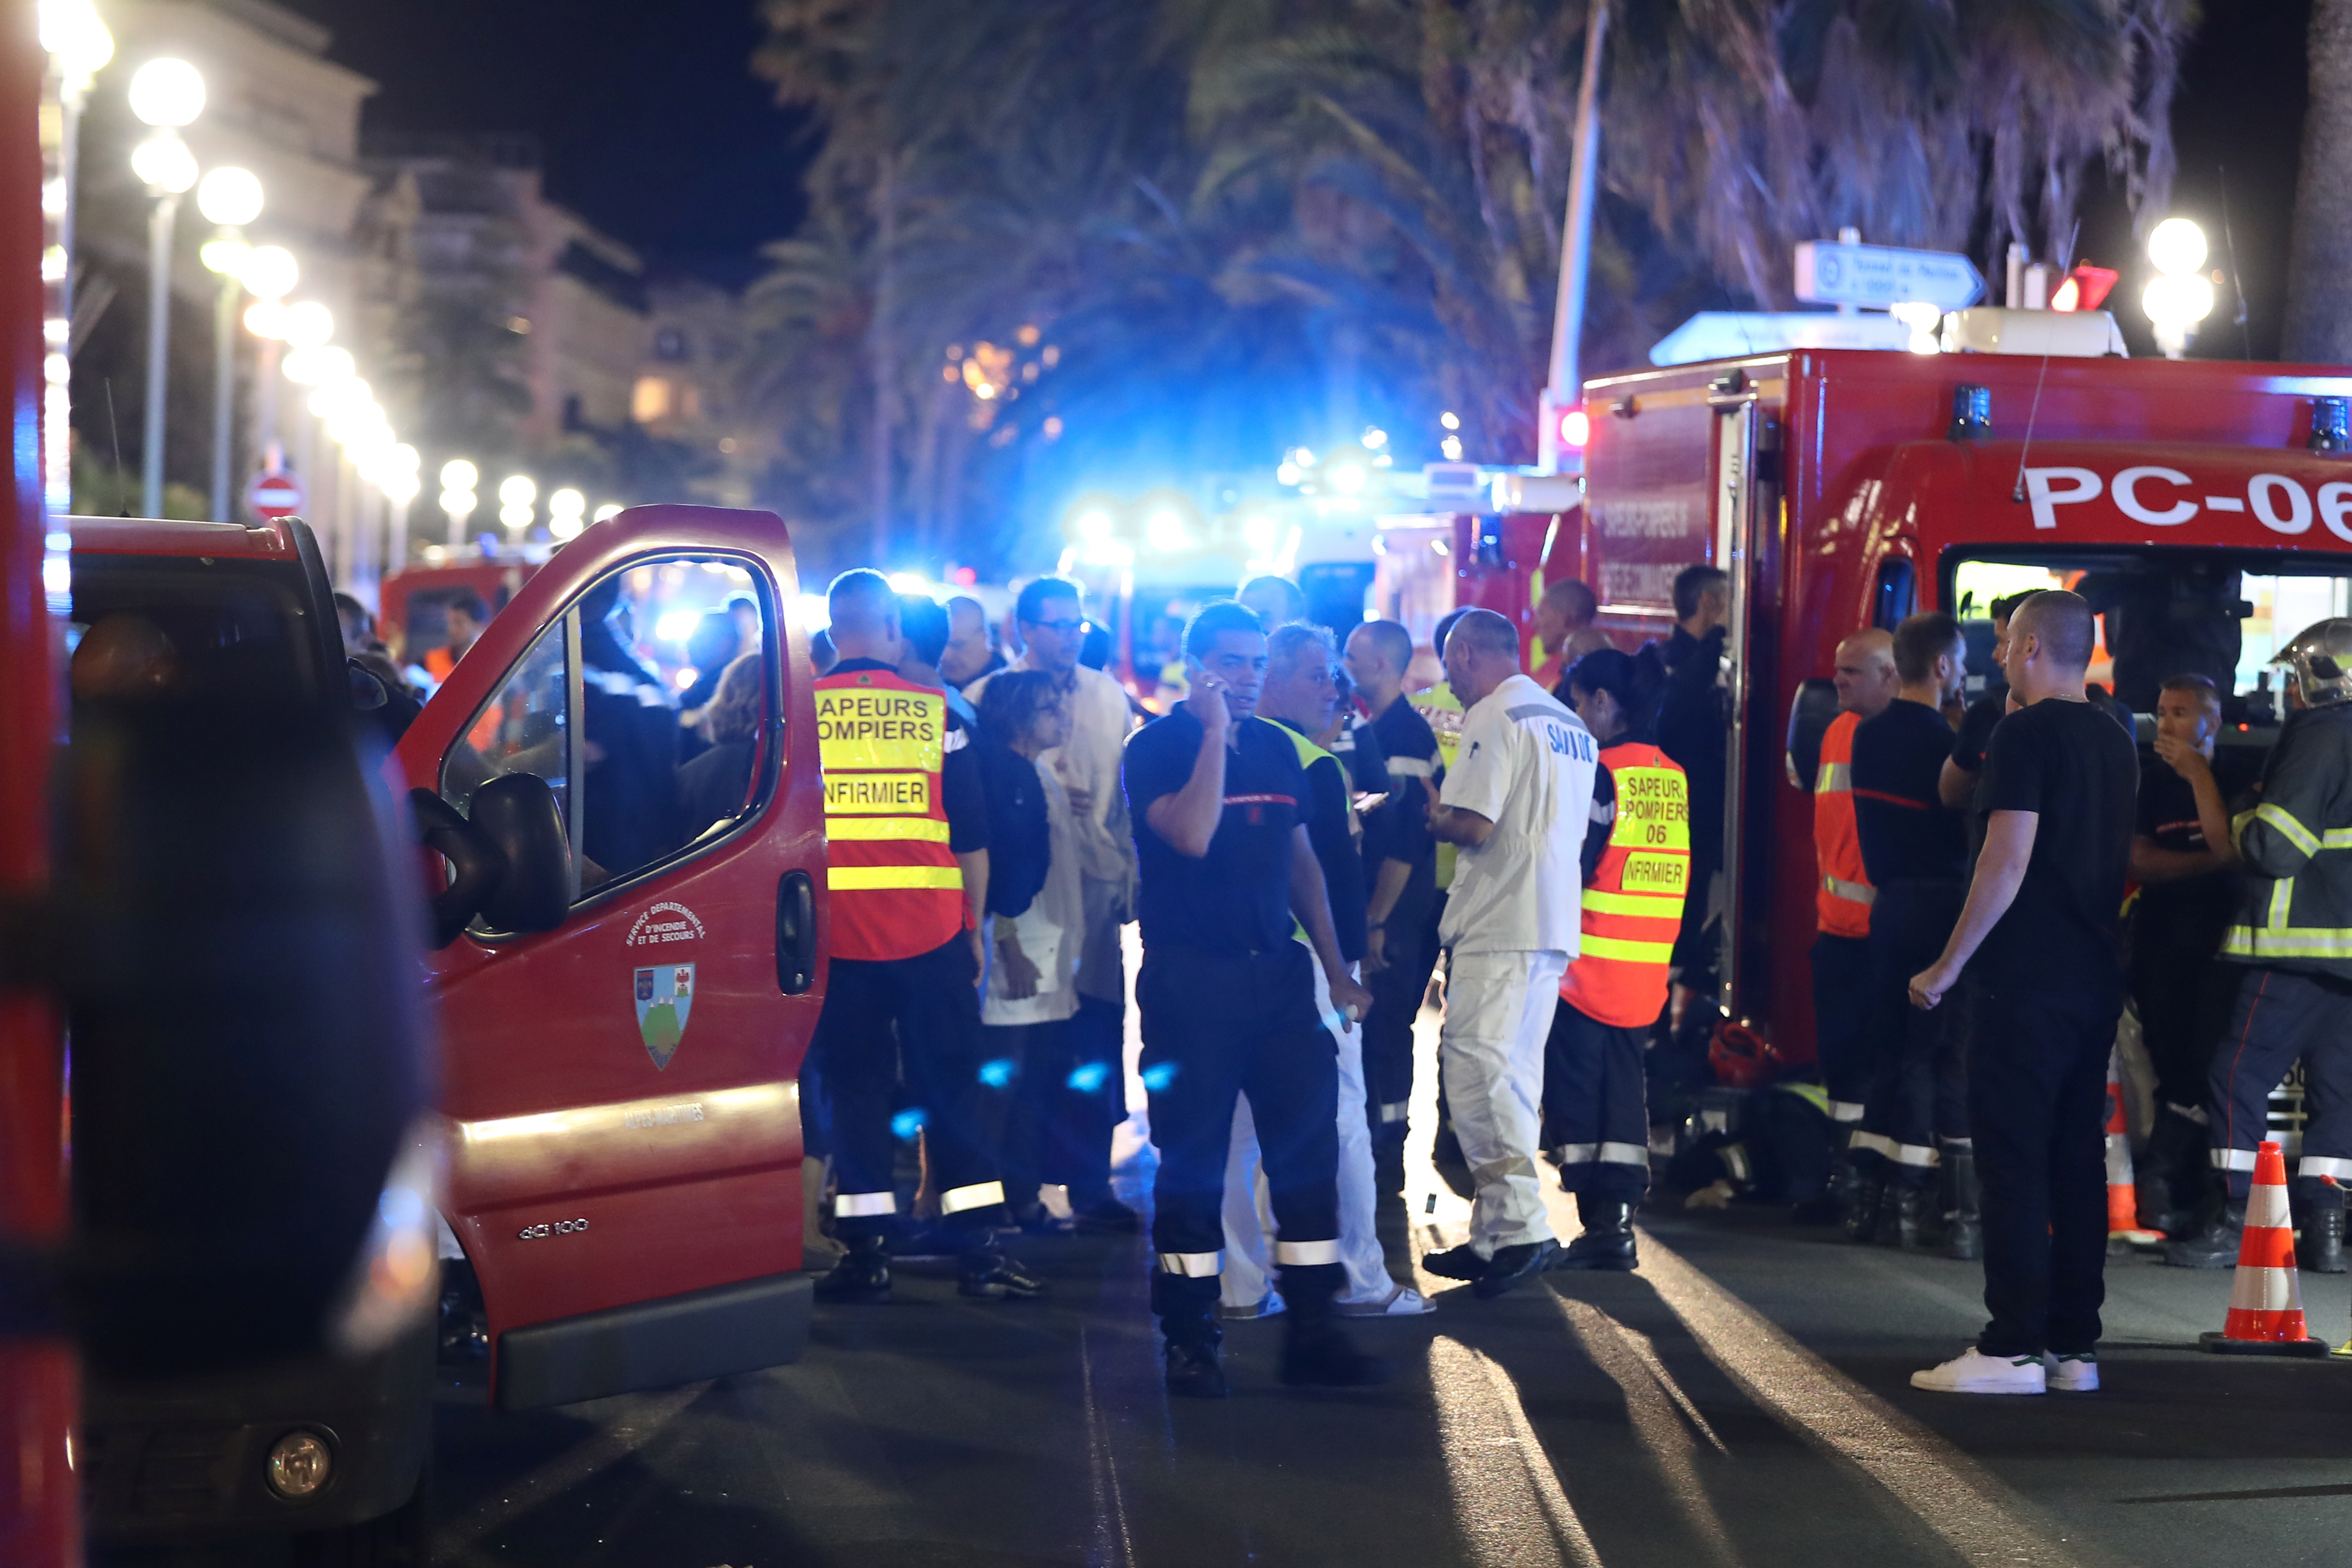 Police officers, firefighters and rescue workers are seen at the site of an attack on the Promenade des Anglais on July 15, 2016, after a truck drove into a crowd watching a fireworks display in the French Riviera town of Nice. A truck ploughed into a crowd in the French resort of Nice on July 14, leaving at least 60 dead and scores injured in an "attack" after a Bastille Day fireworks display, prosecutors said on July 15.  / AFP PHOTO / Valery HACHE